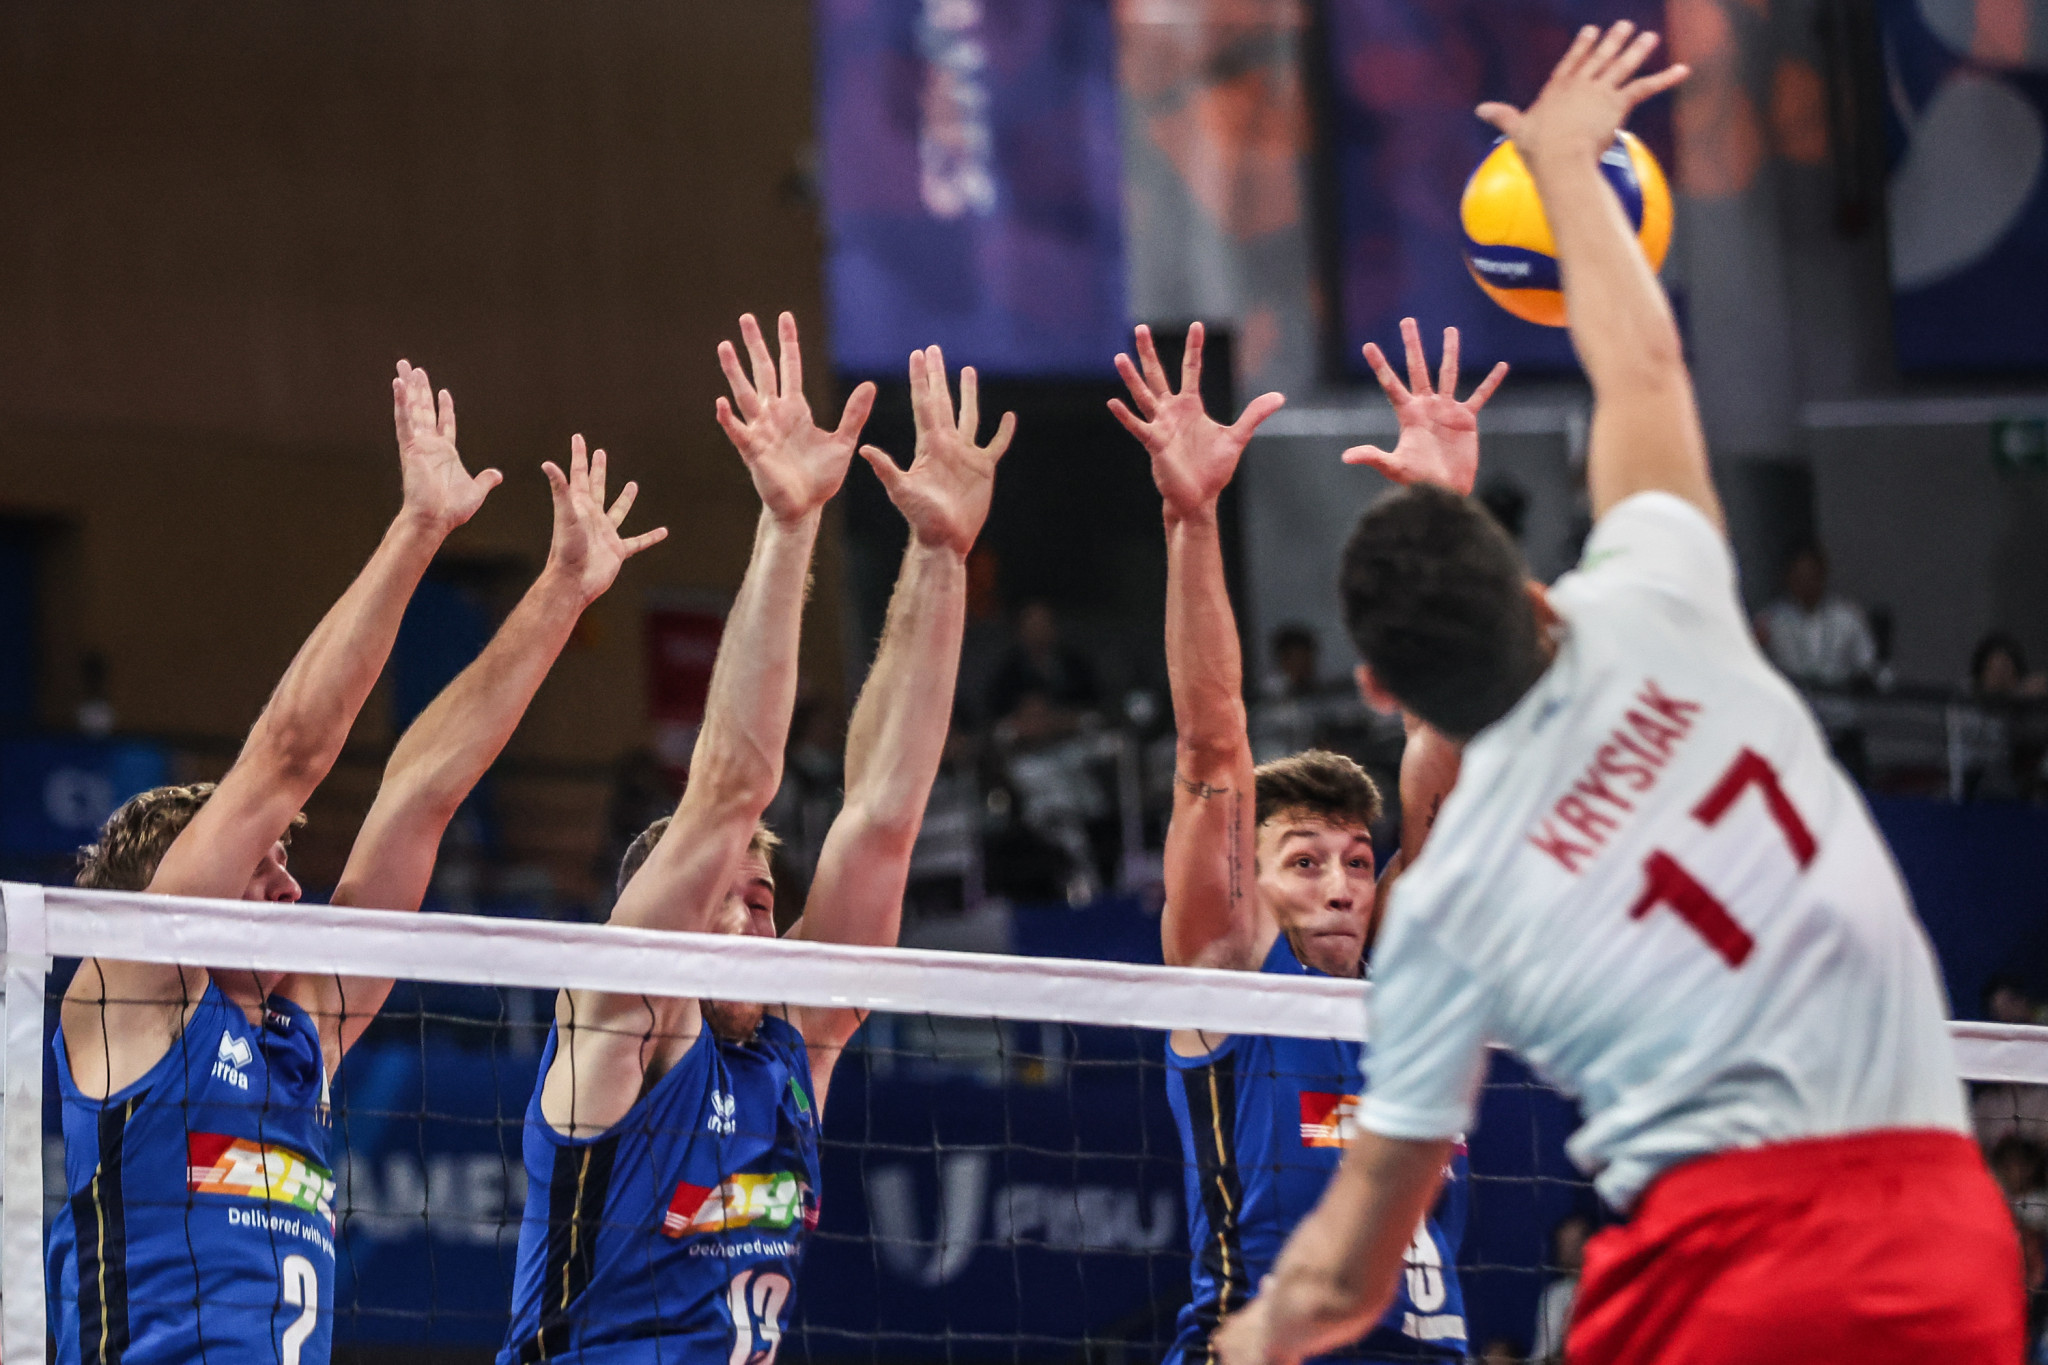 Italy claimed men's volleyball gold after defeating Poland ©Chengdu 2021